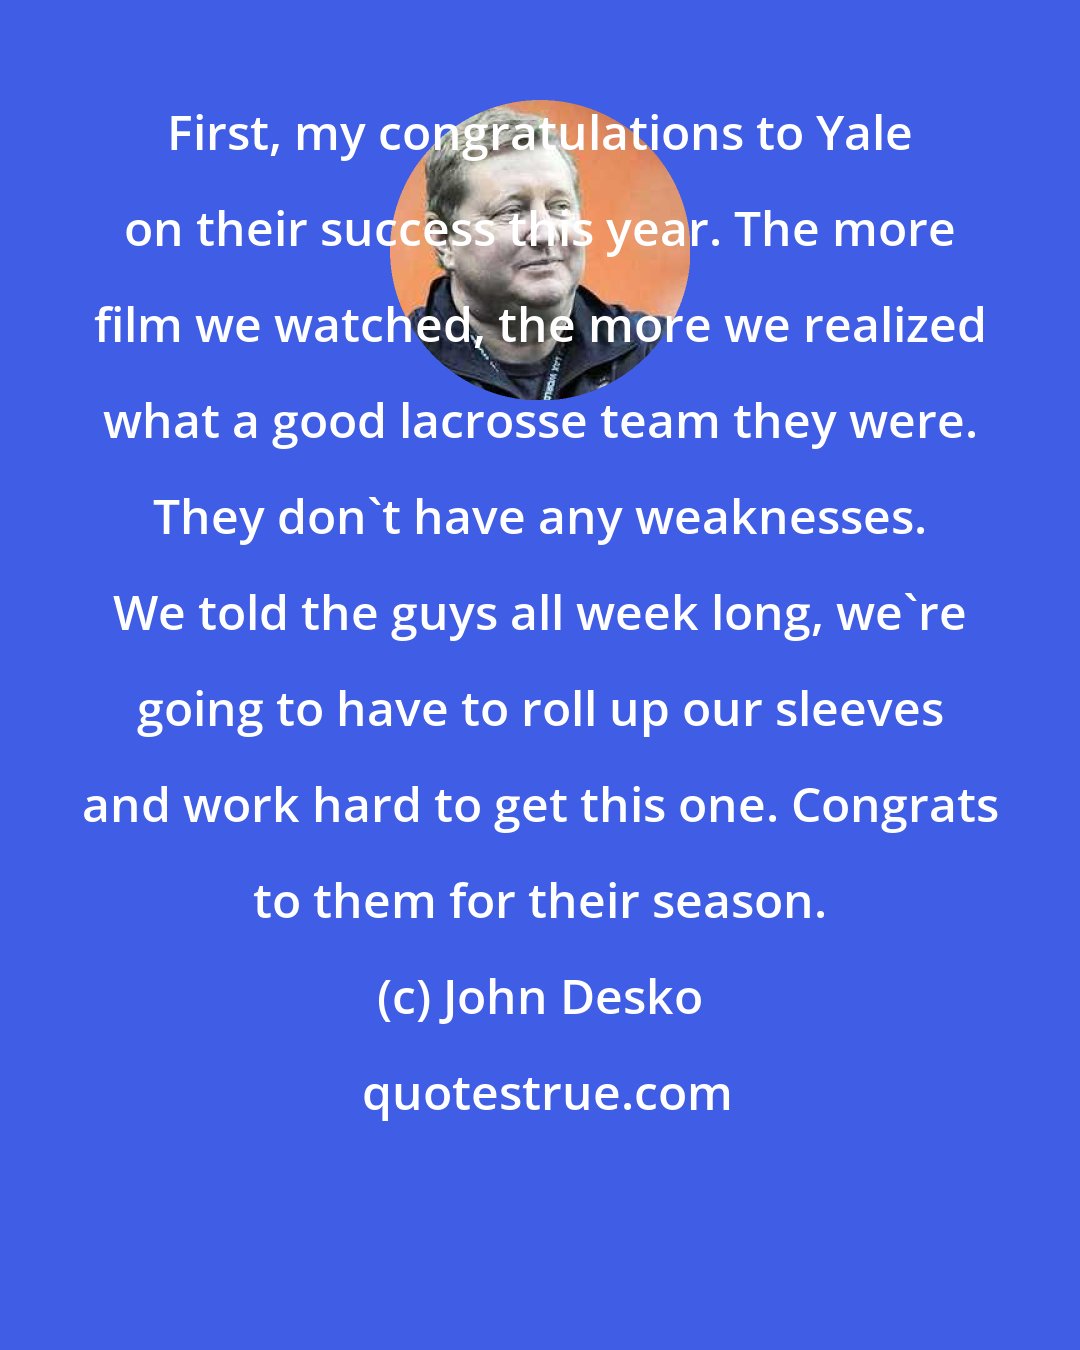 John Desko: First, my congratulations to Yale on their success this year. The more film we watched, the more we realized what a good lacrosse team they were. They don't have any weaknesses. We told the guys all week long, we're going to have to roll up our sleeves and work hard to get this one. Congrats to them for their season.